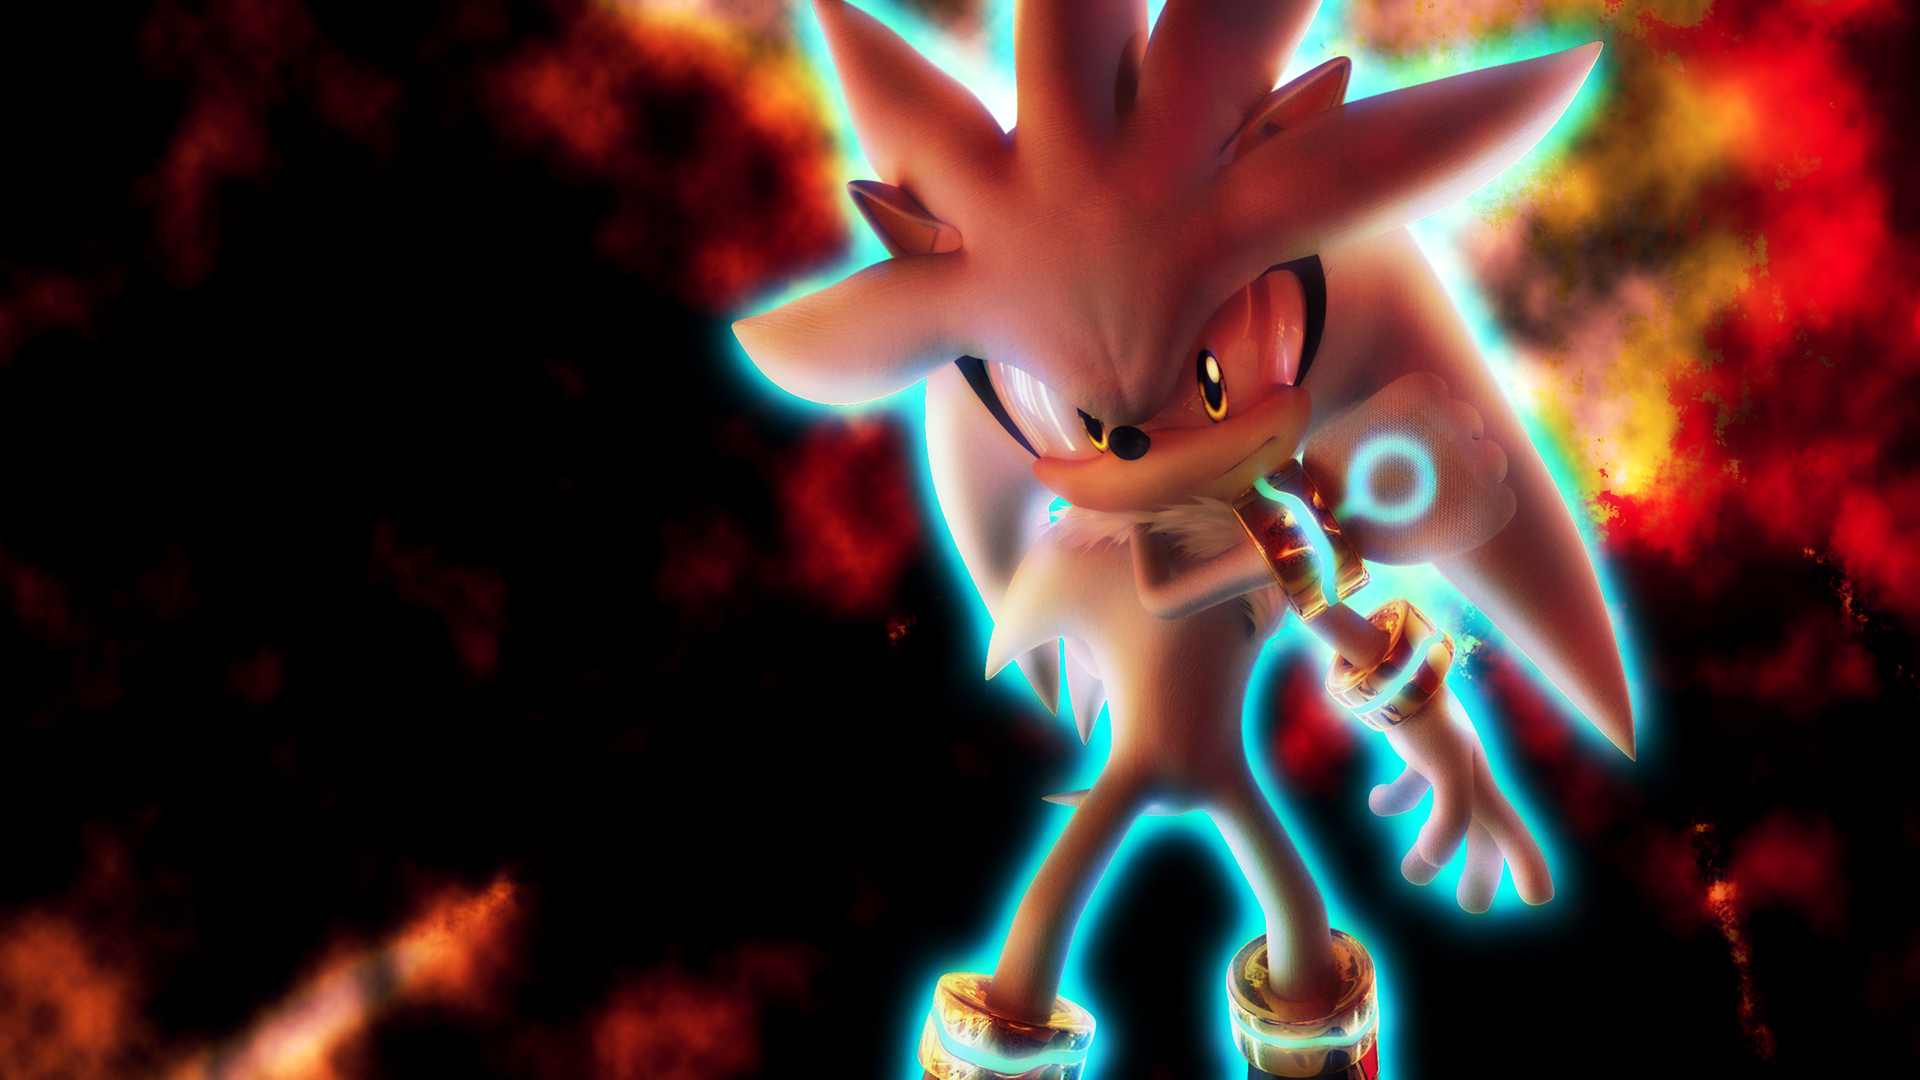 Silver The Hedgehog Wallpapers